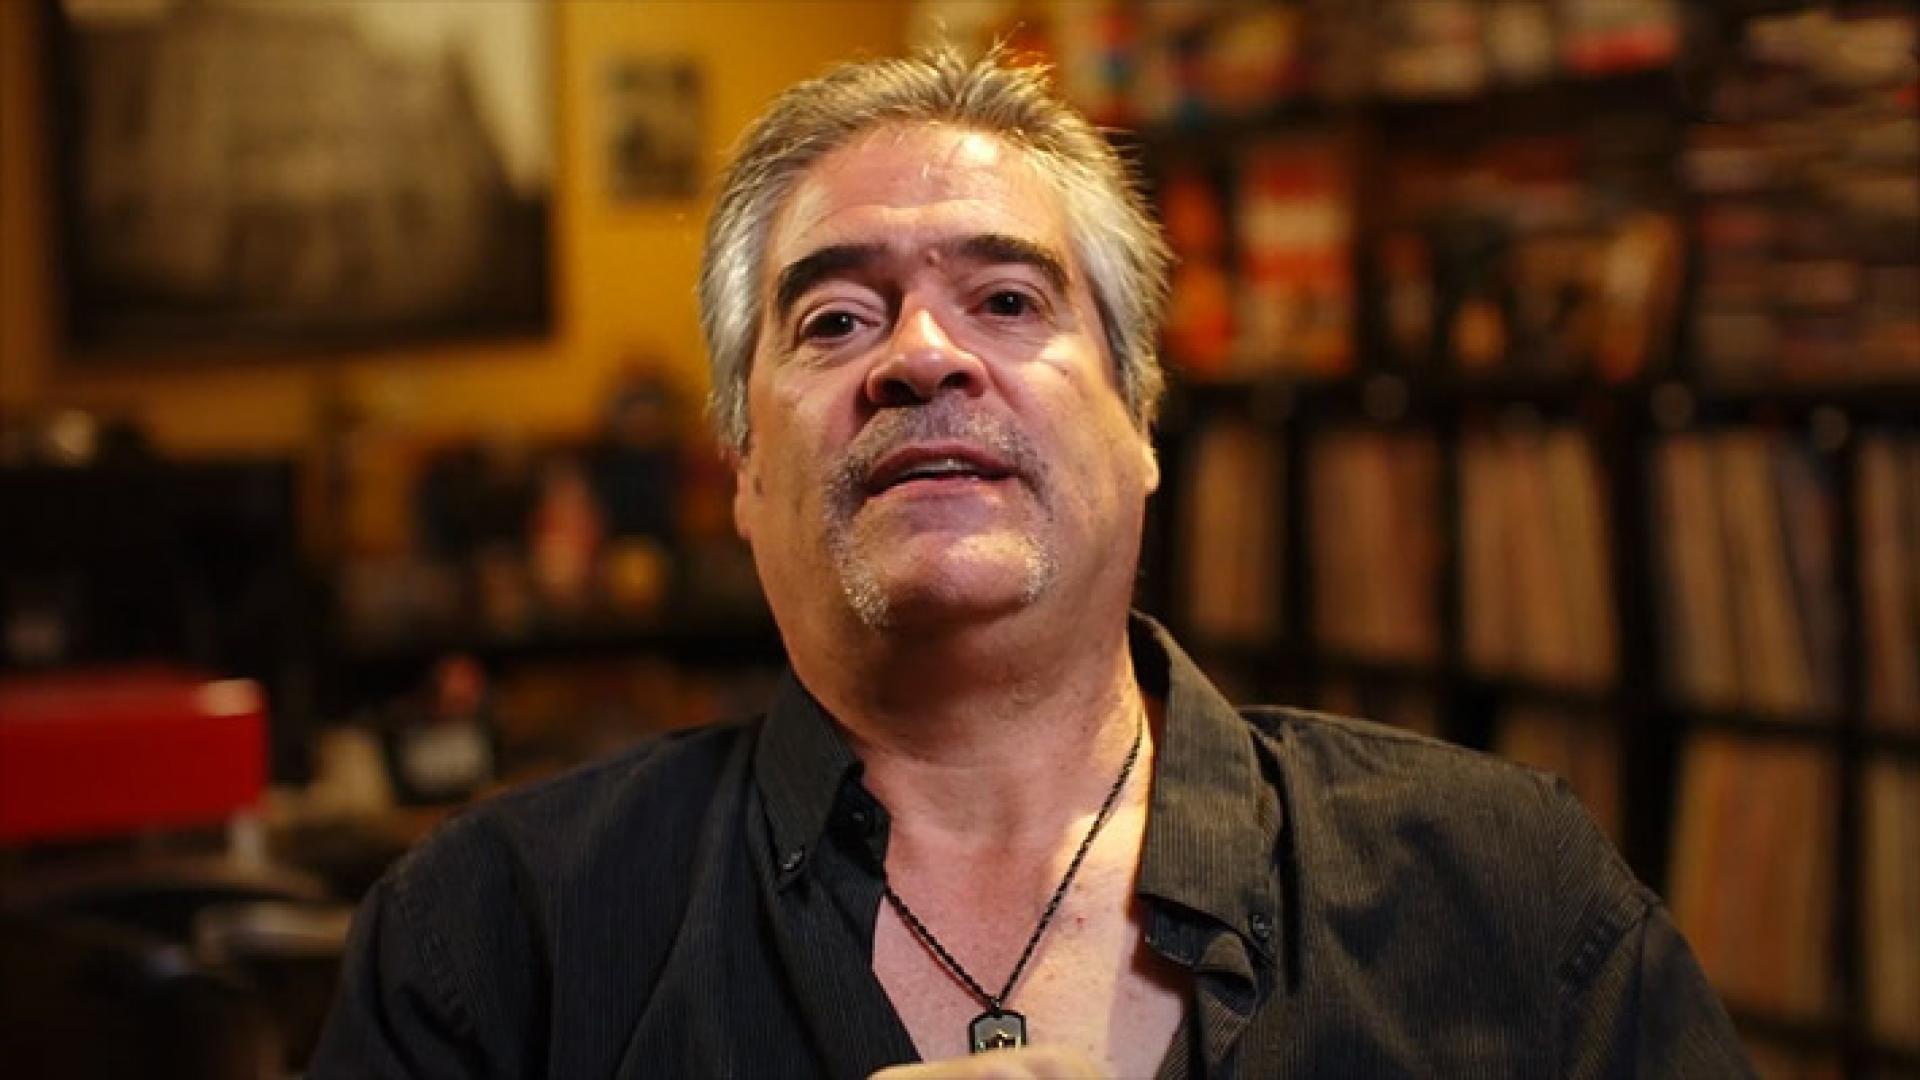 Vince Russo served as WWE&#039;s head writer from 1997 to 1999